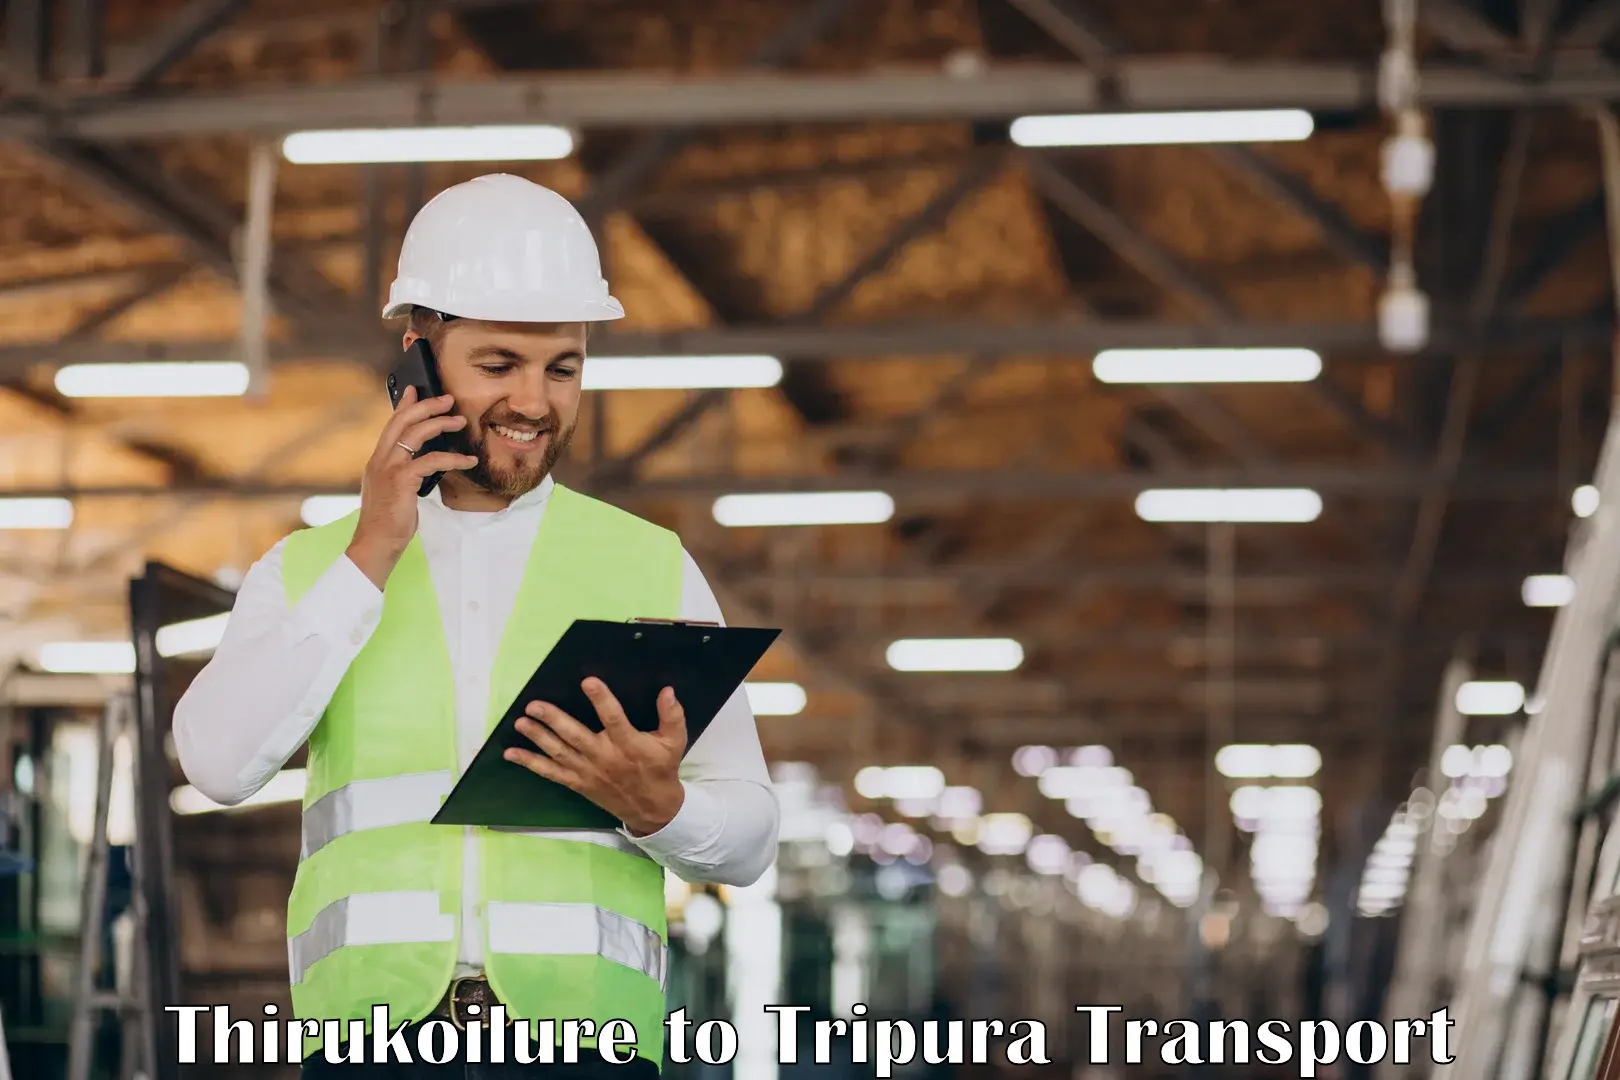 Commercial transport service Thirukoilure to Tripura